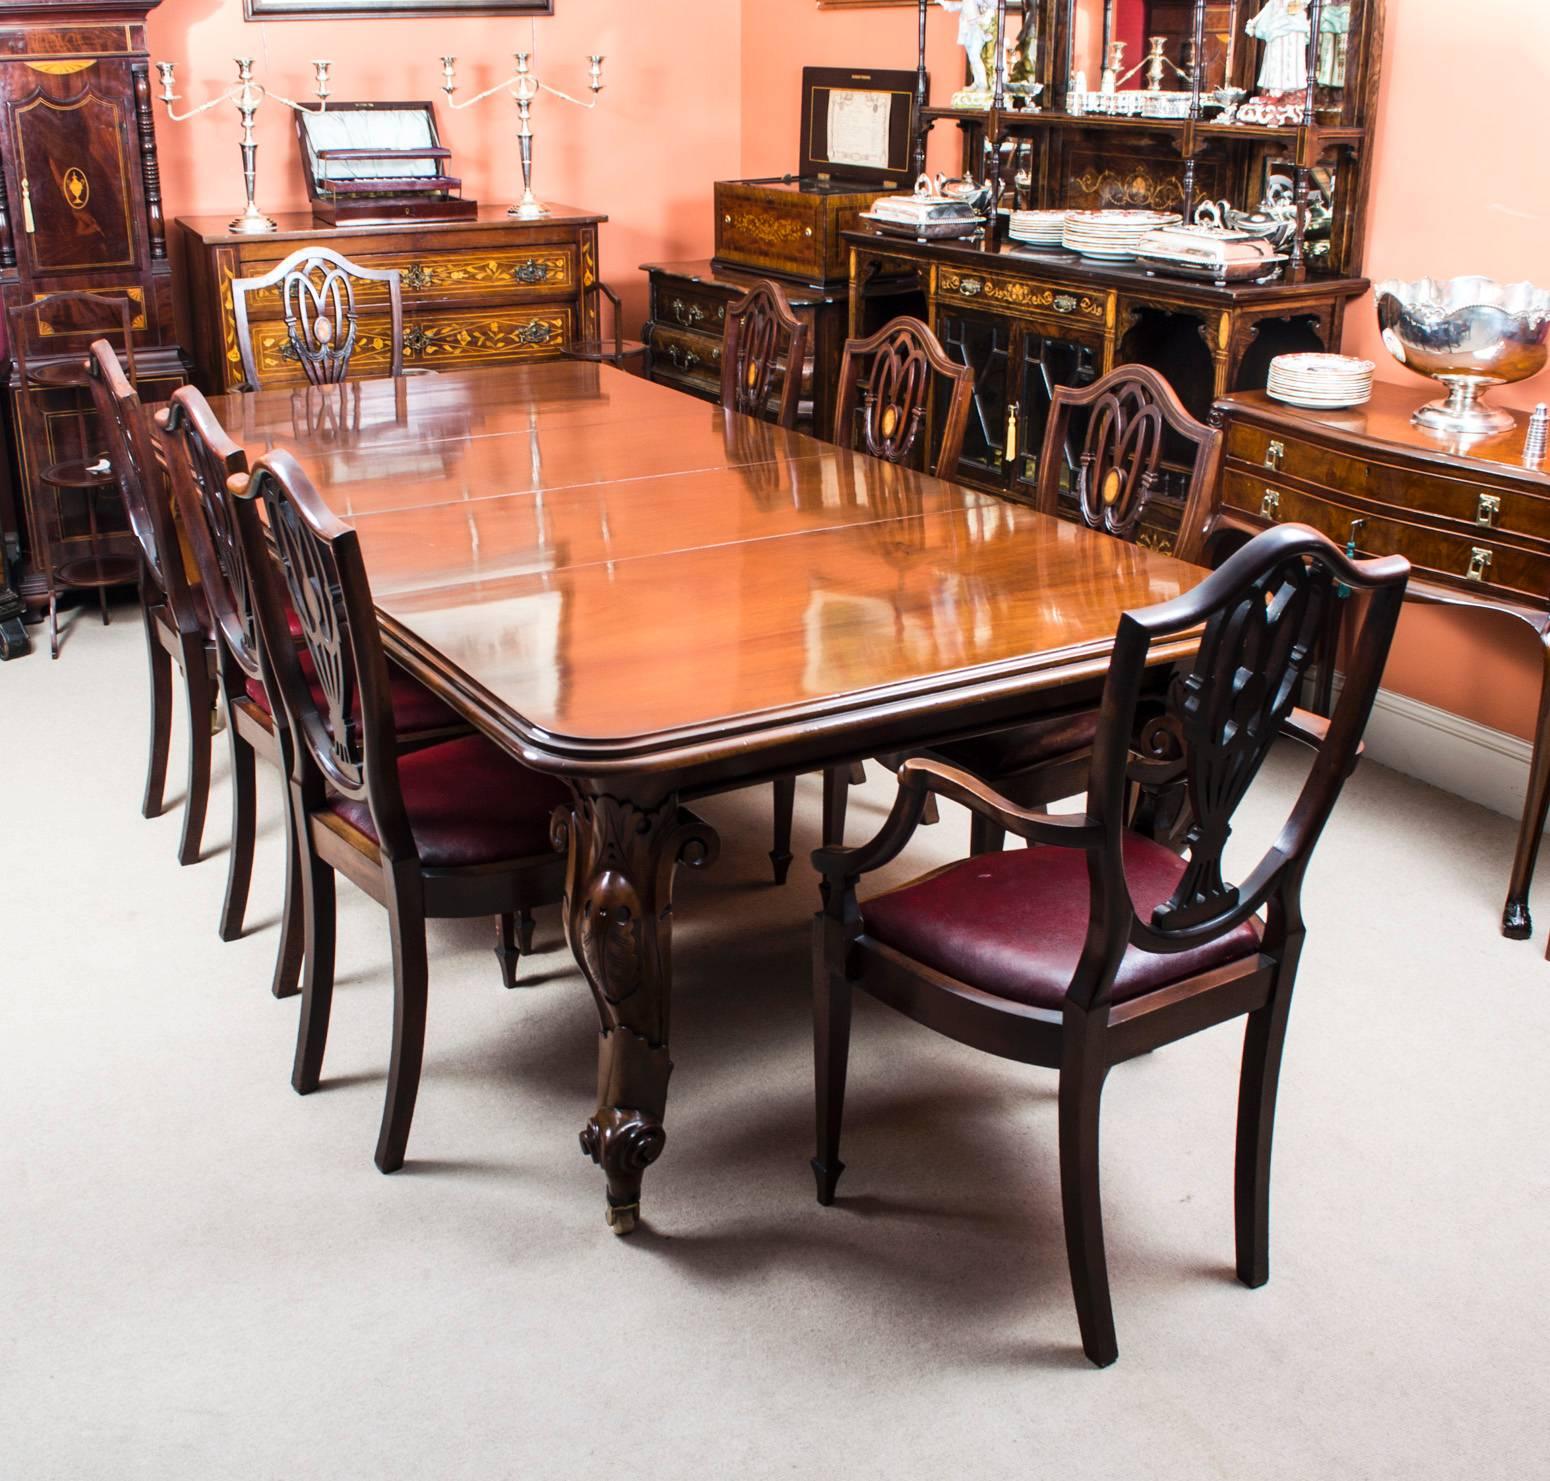 This is a beautiful antique dining set comprising an antique Victorian mahogany dining table, circa 1860 in date, and a set of eight antique English Hepplewhite dining chairs.

This amazing table has two original leaves and can sit ten people in